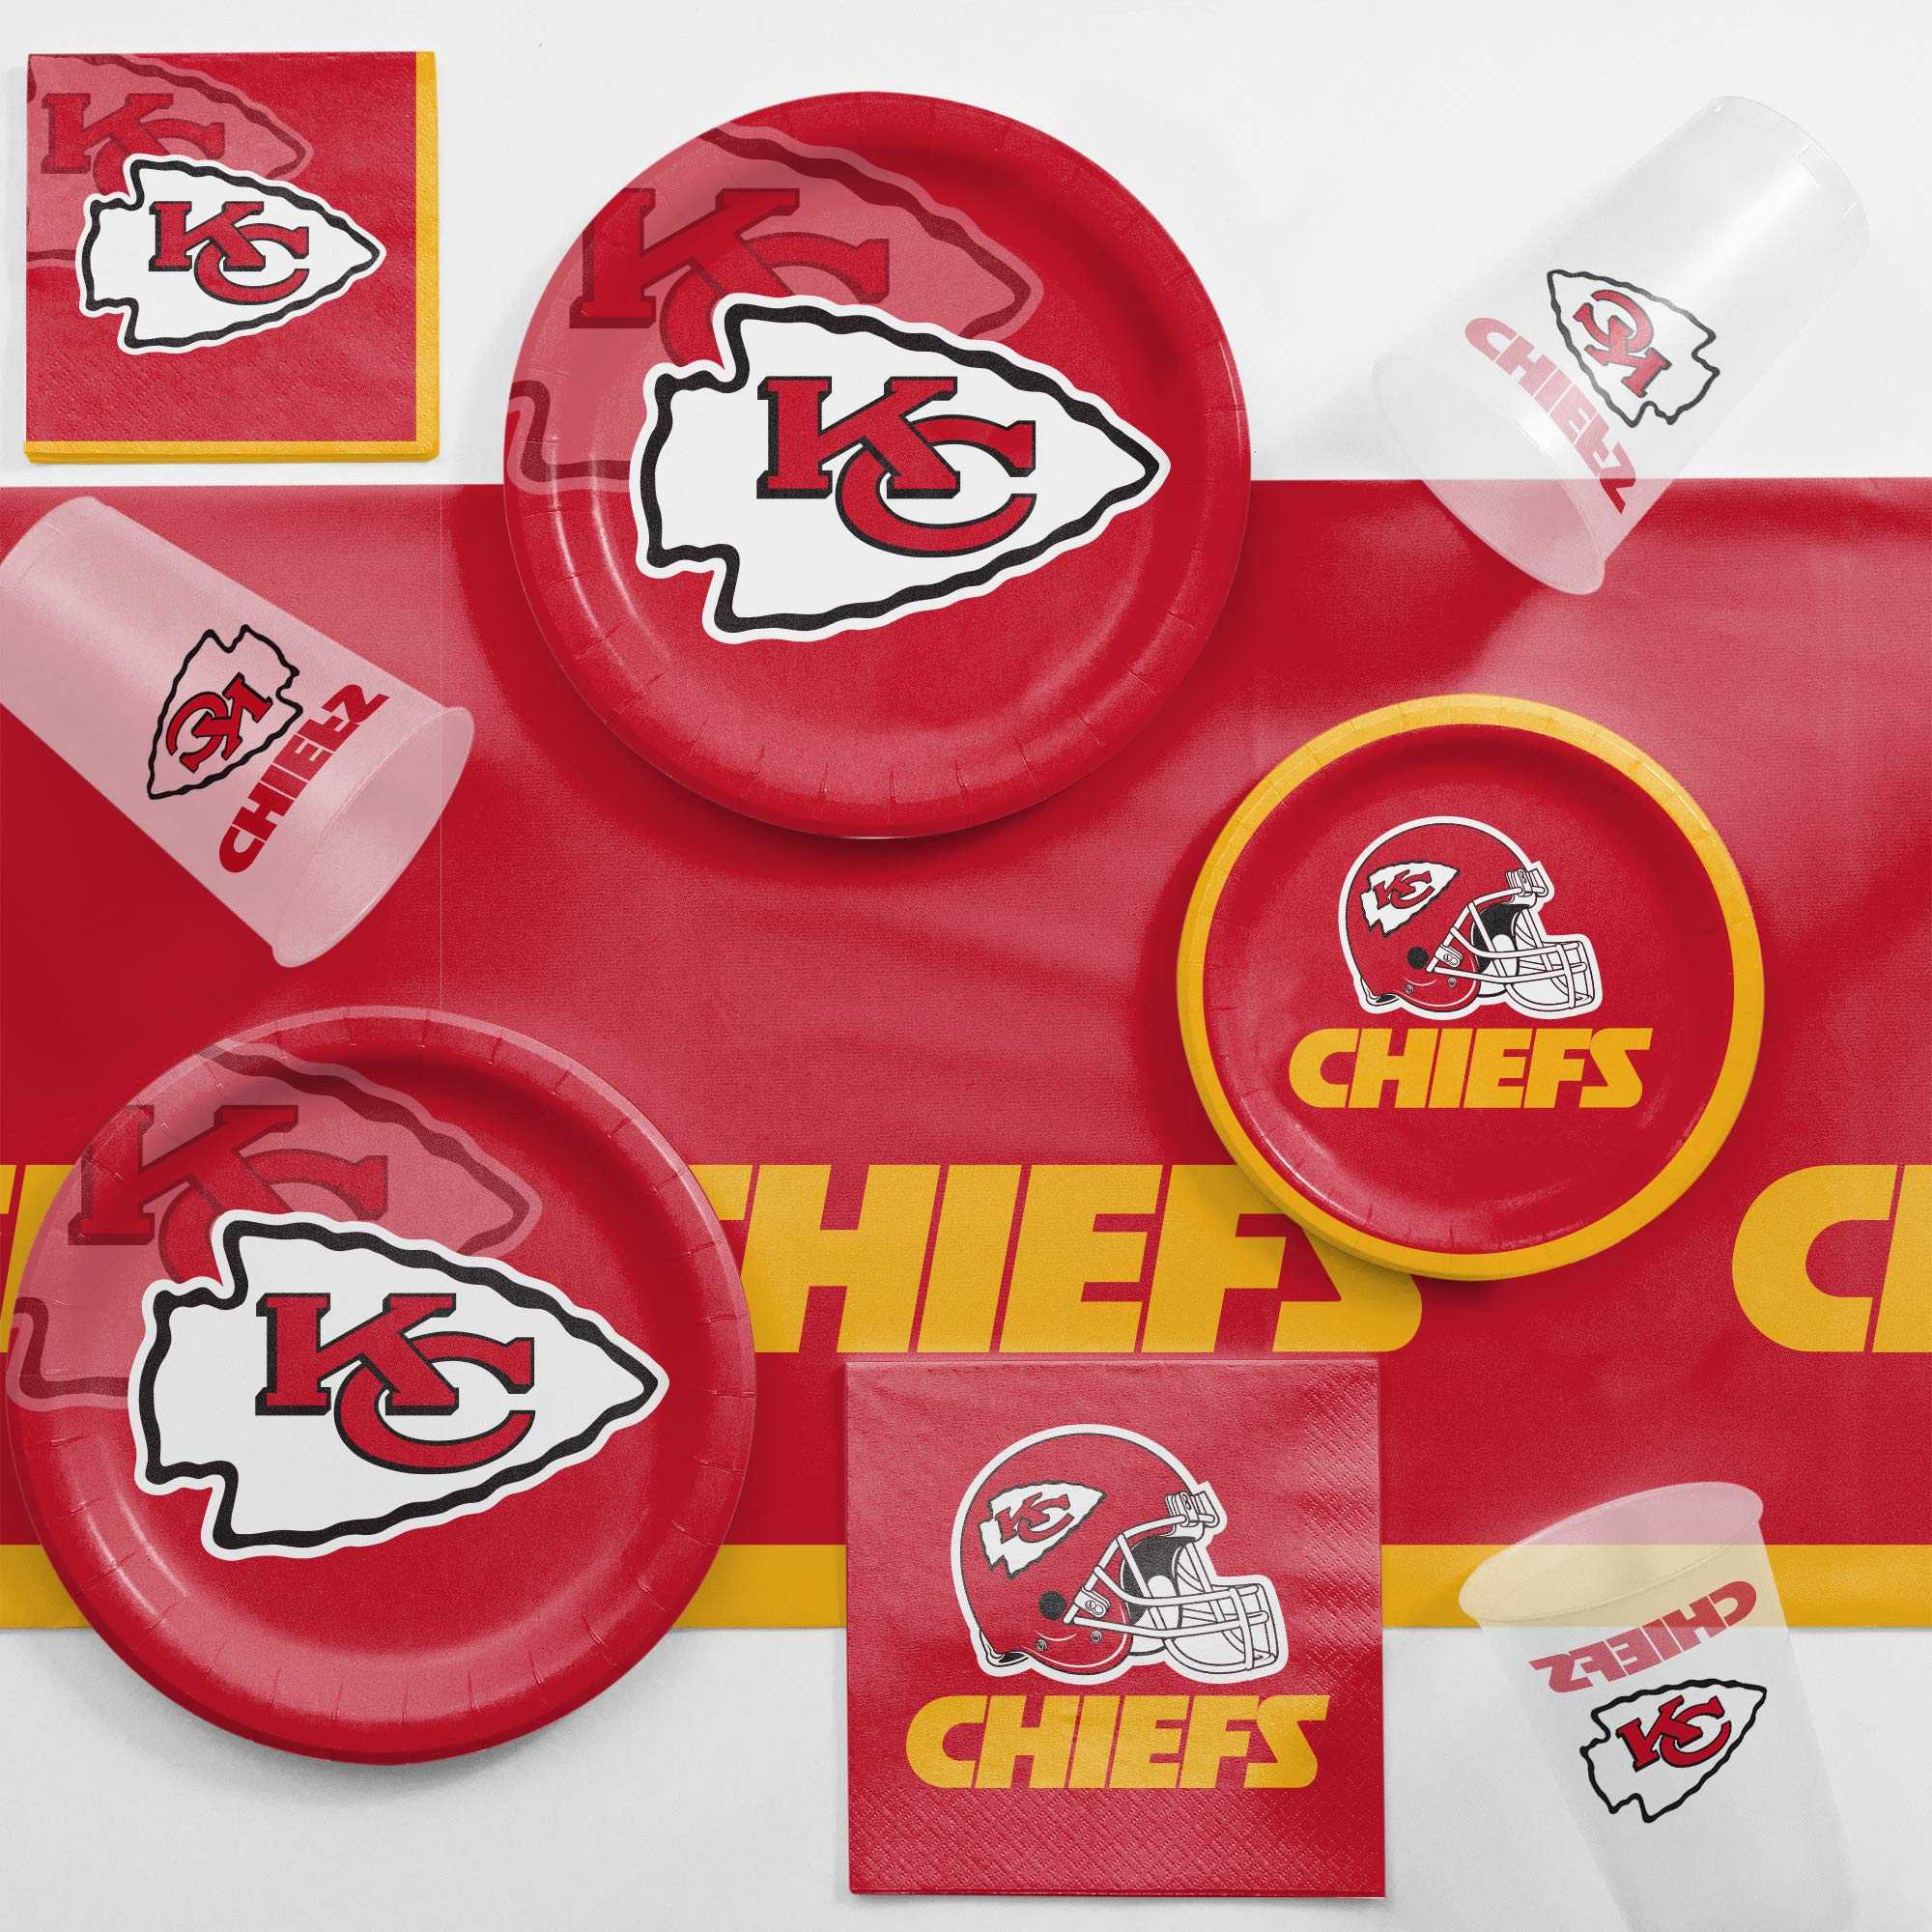 Kansas City Chiefs gear you can find online for Super Bowl party